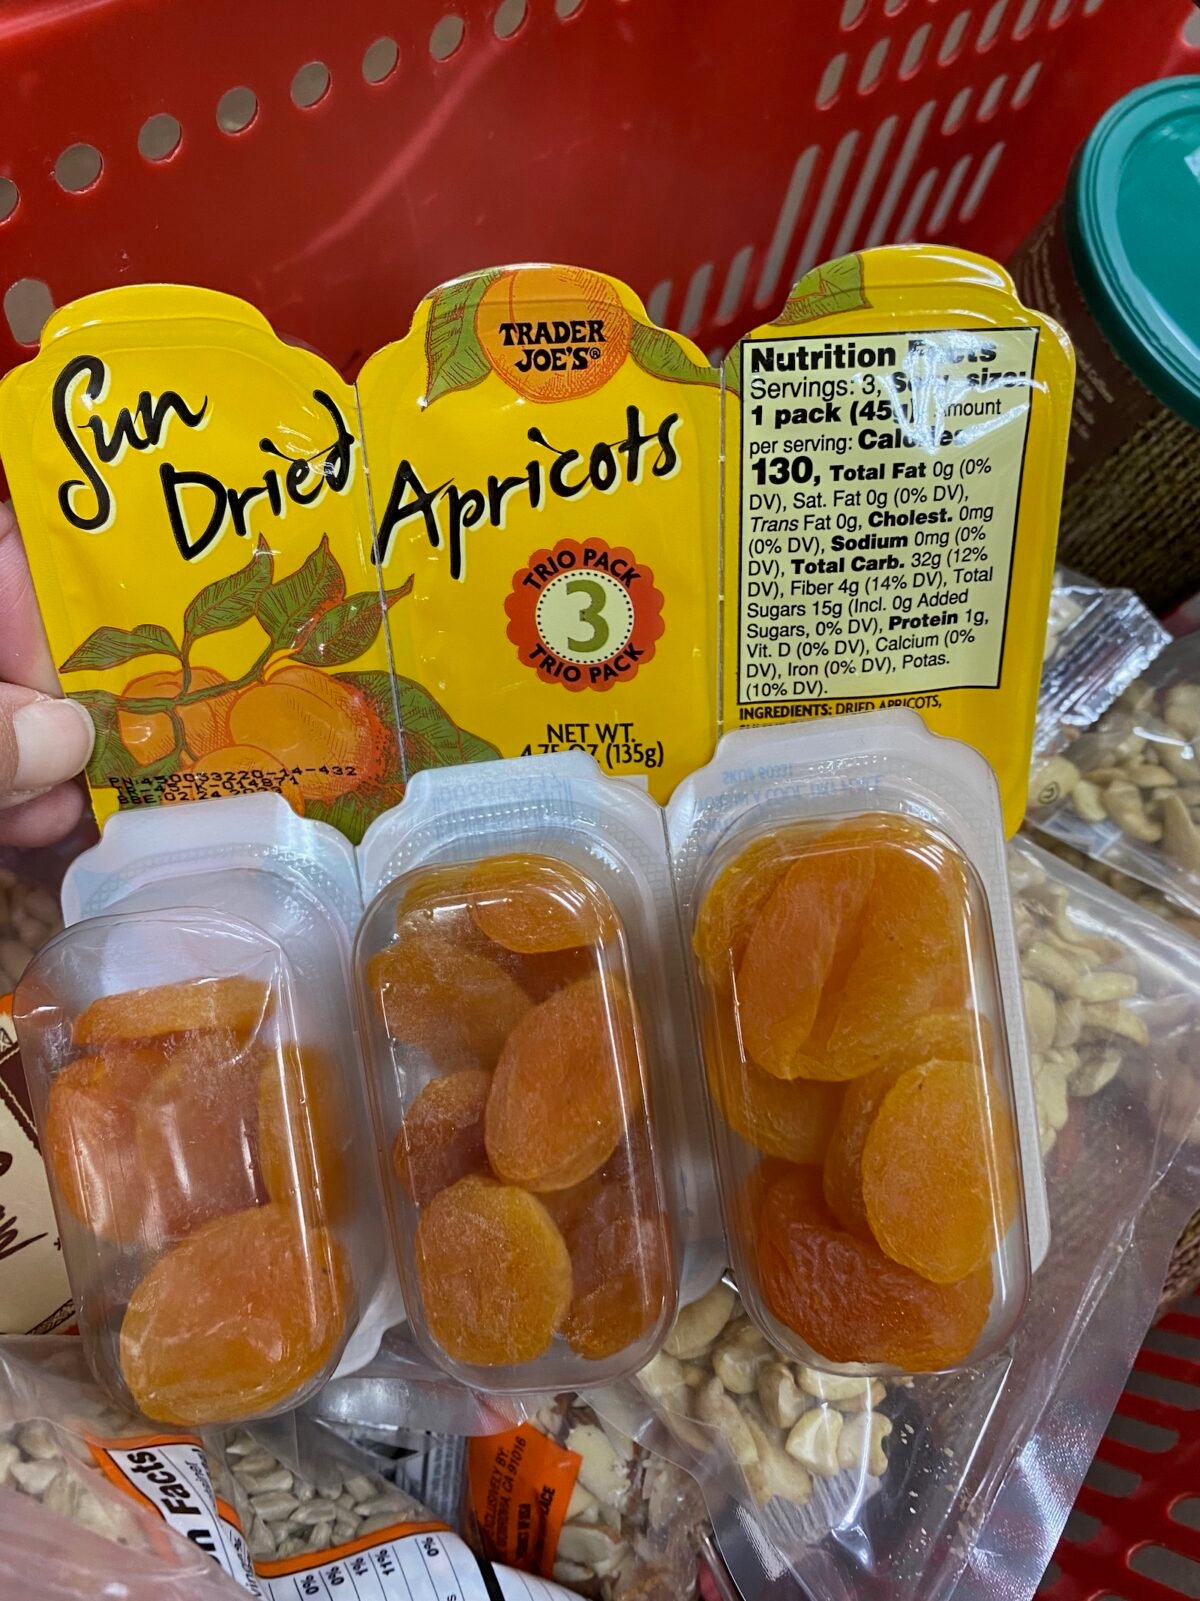 Packages of individually wrapped apricots from Trader Joe's